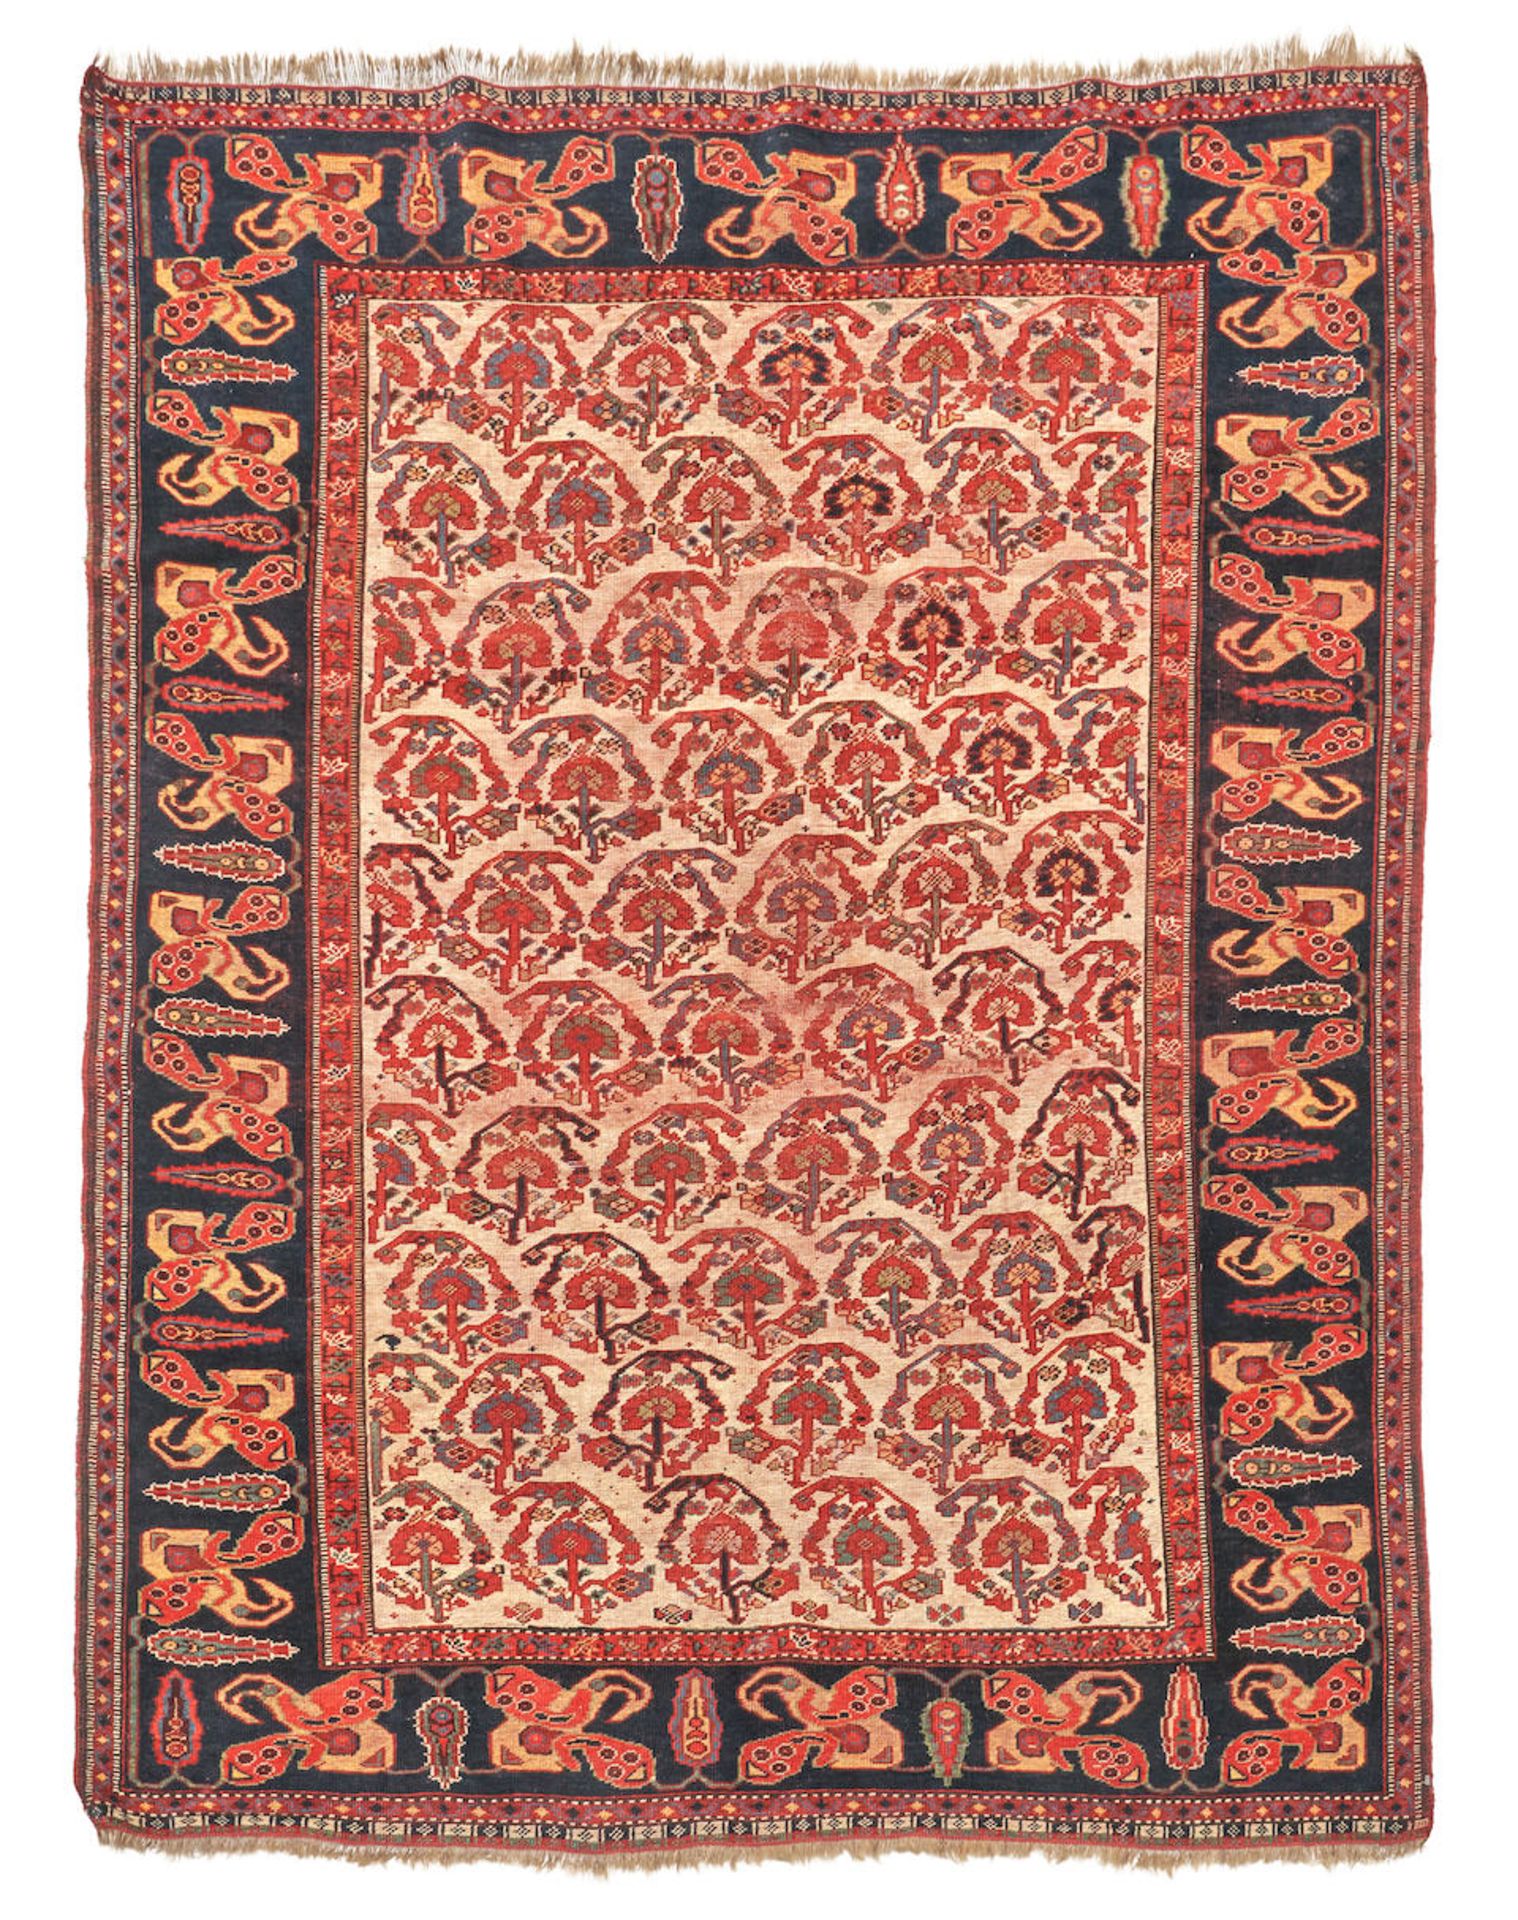 Mother/Child Boteh Afshar Rug Iran 4 ft. 2 in. x 5 ft.